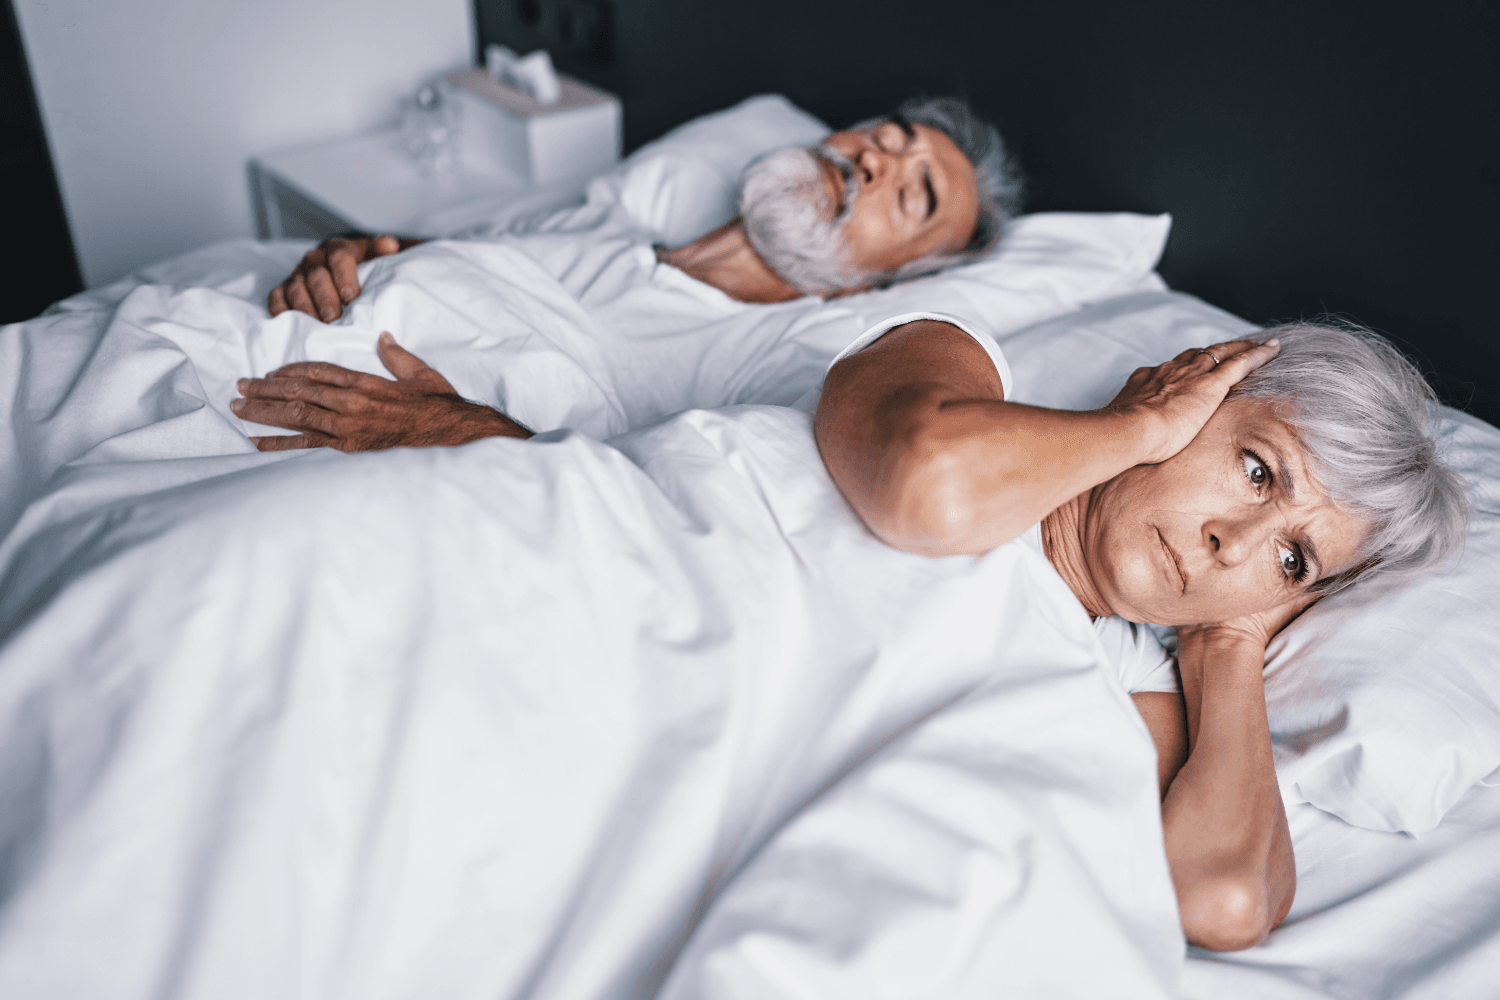 man and woman lying in bed sleeping, woman covering ears as man snores